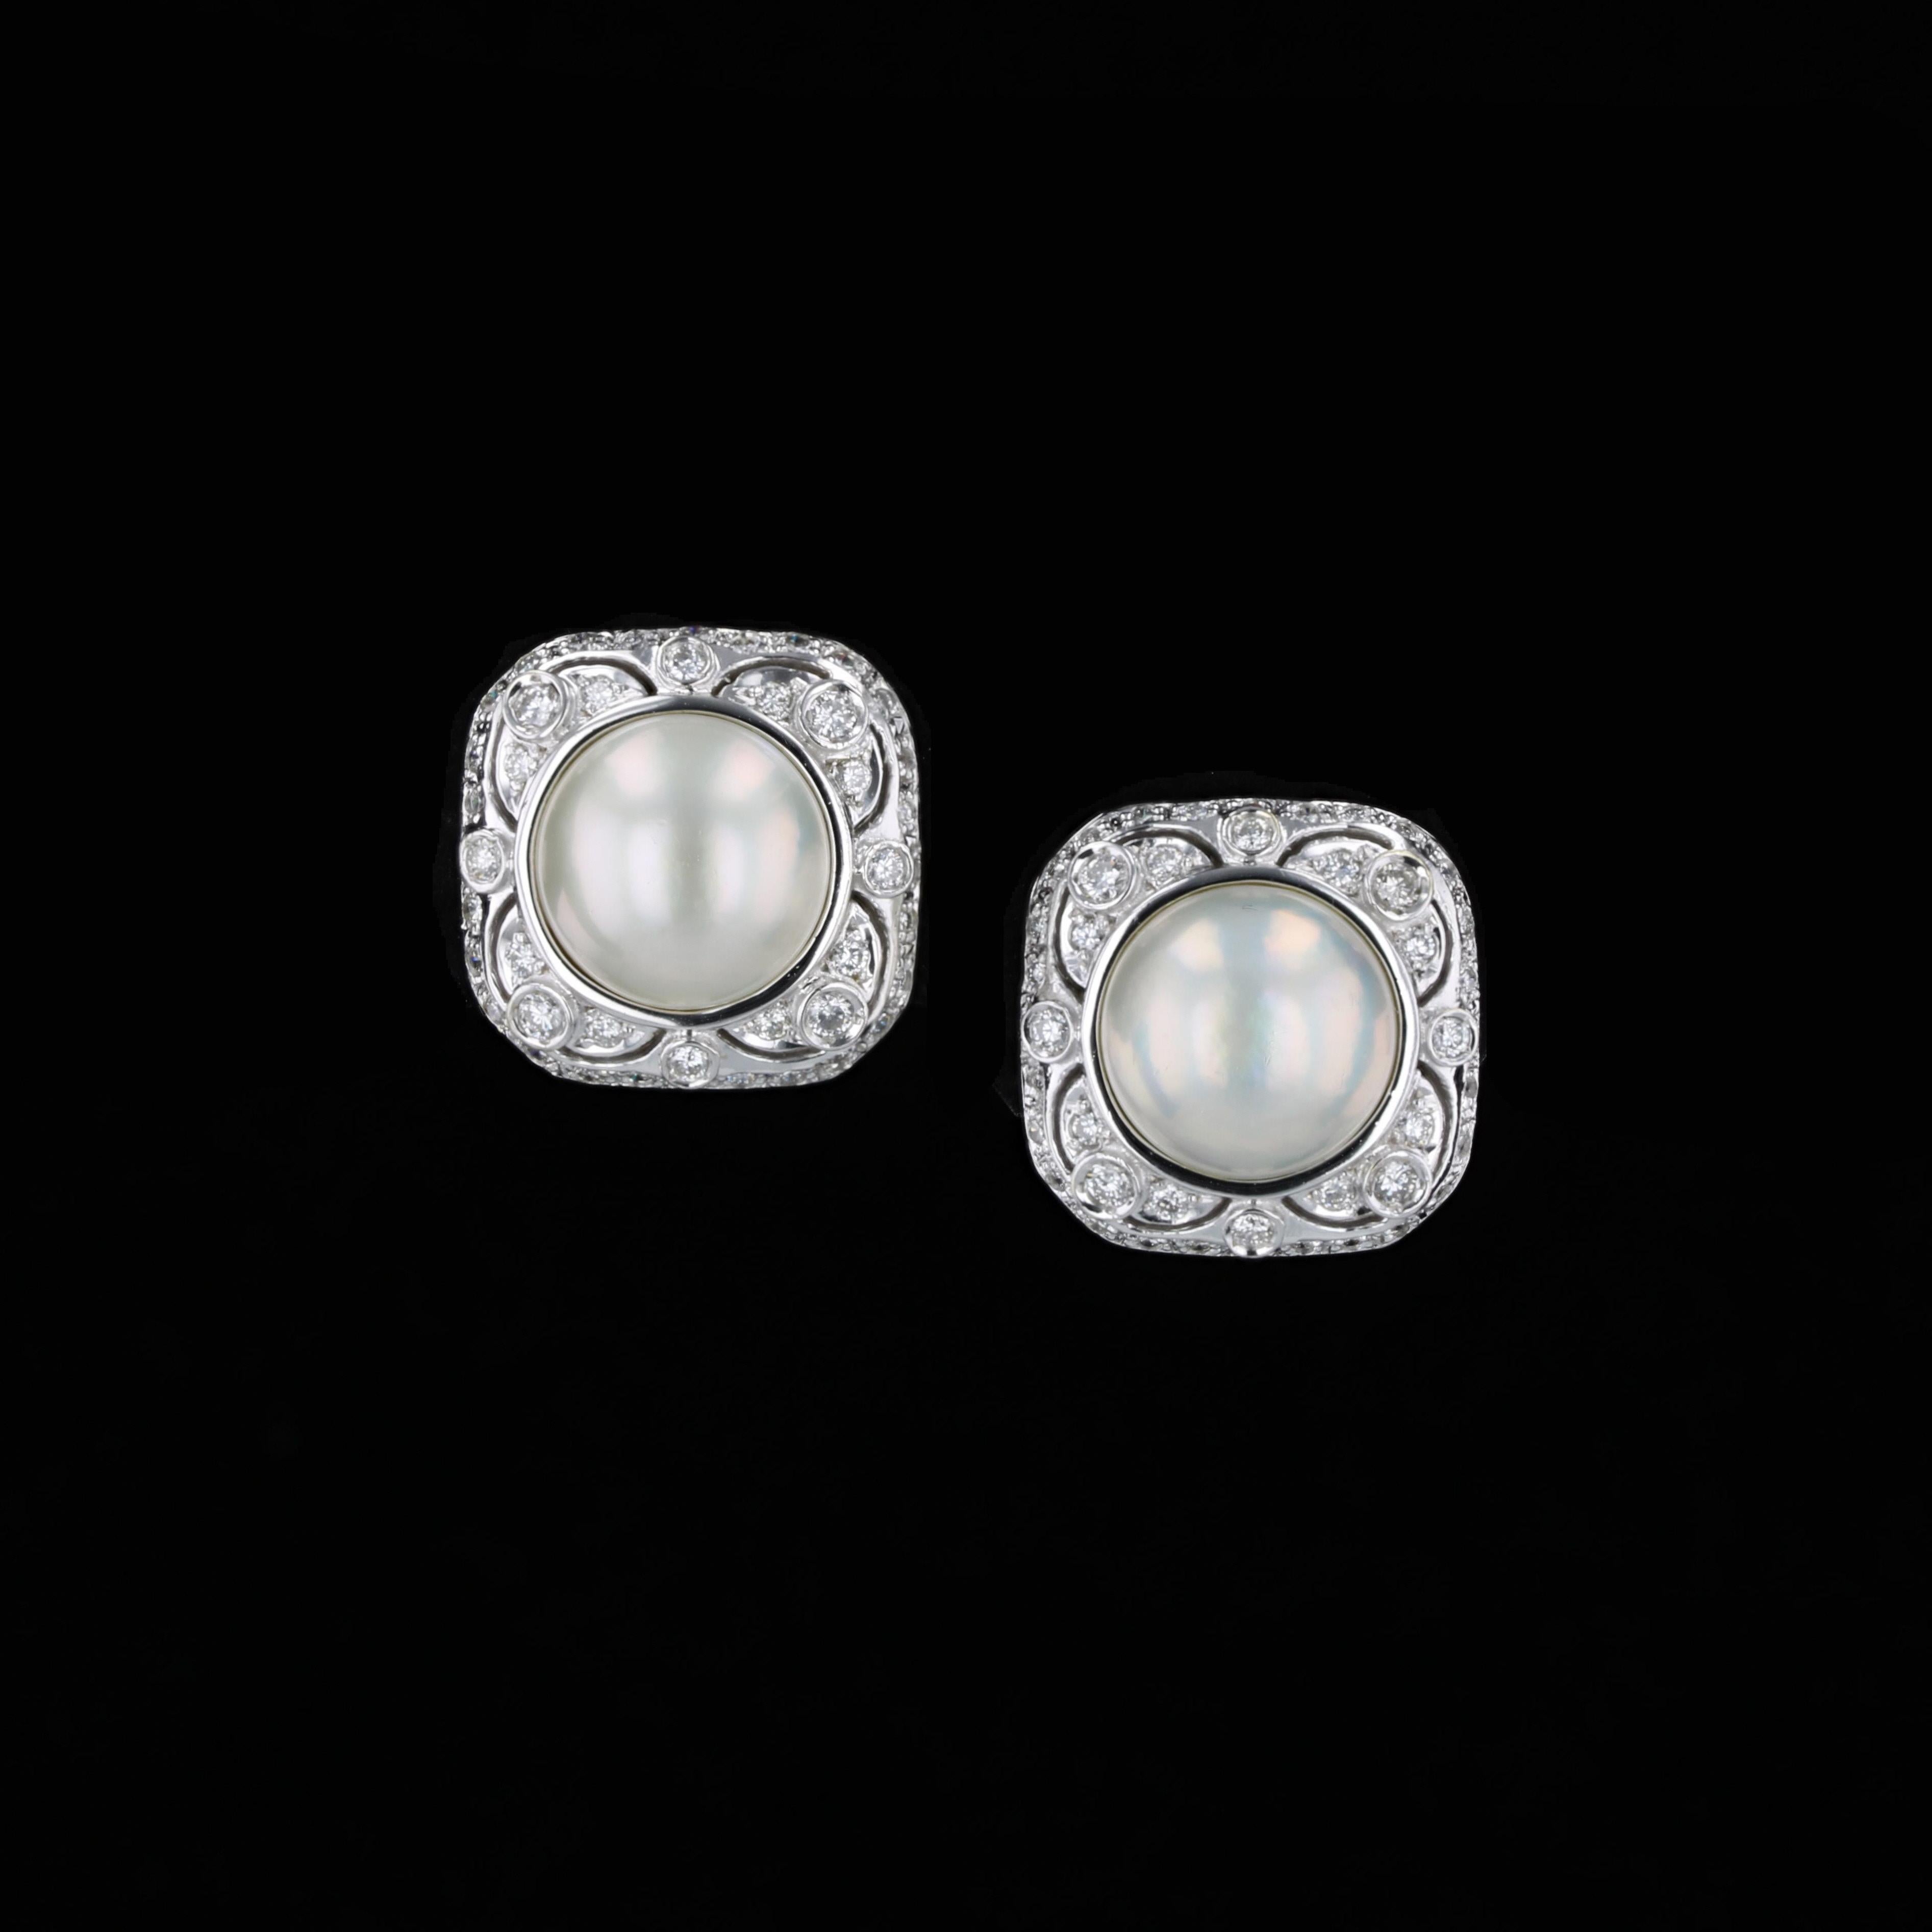 A pair of white mabe pearls measuring 13mm center these estate earrings crafted in 18k white gold. Square button settings glimmer with 80 round brilliant diamonds having average color of H/I and average clarity of SI1. The diamonds have an